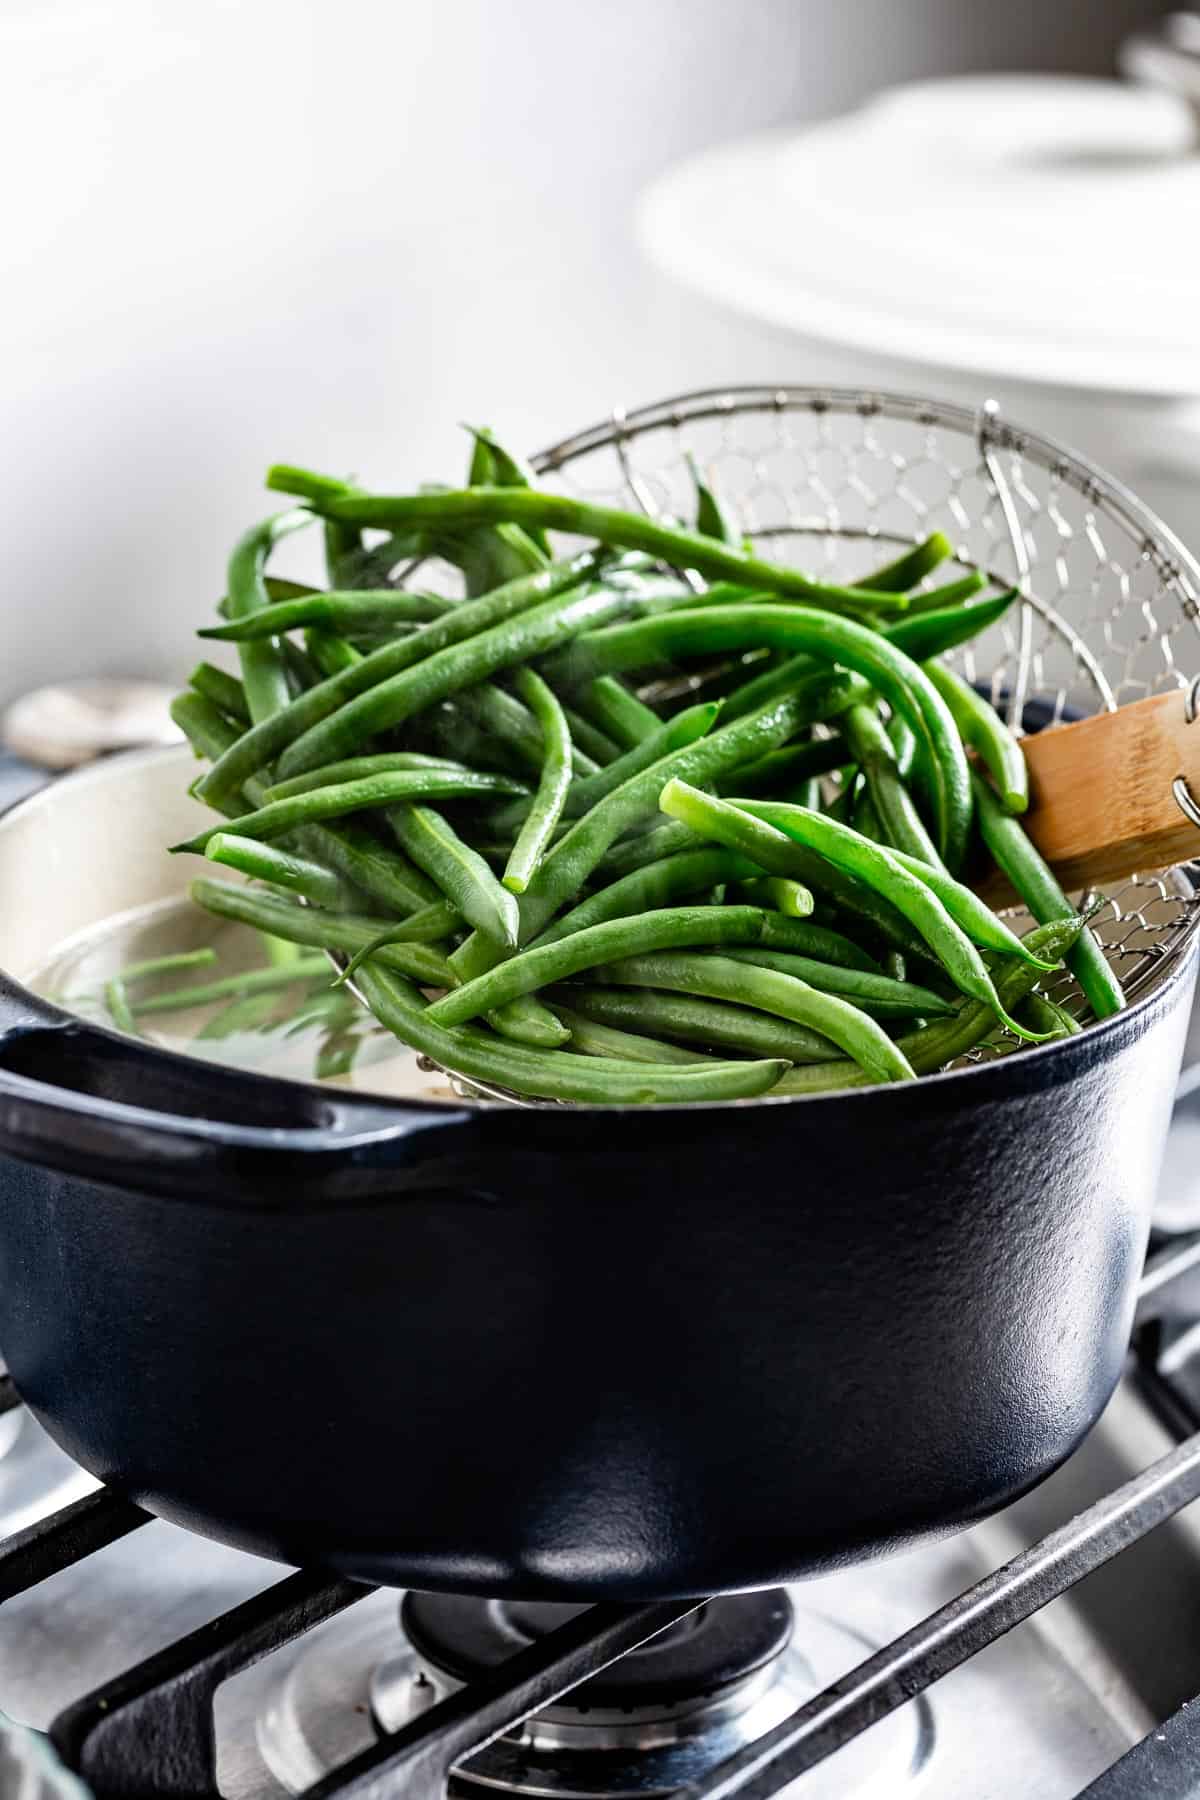 https://foolproofliving.com/wp-content/uploads/2022/01/Boiled-Green-Beans.jpg